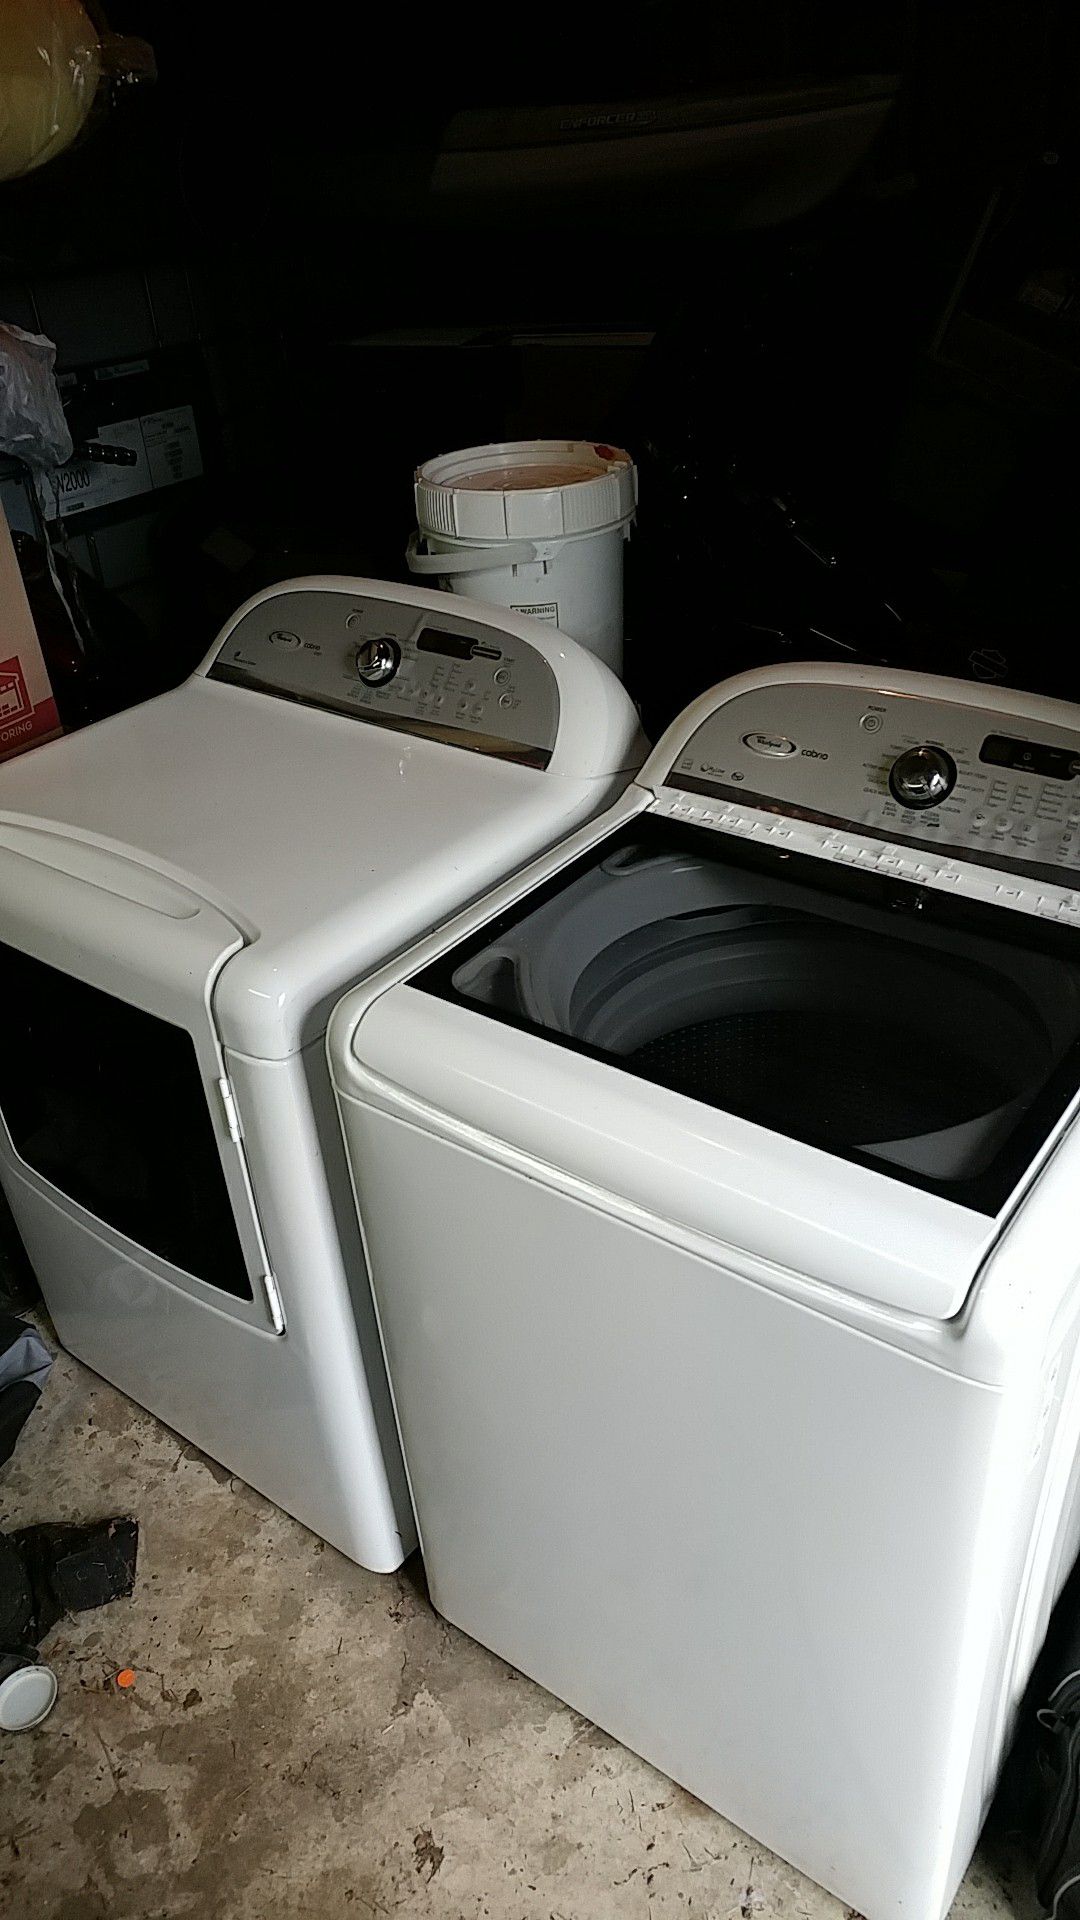 Whirlpool Cabrio washer and dryer combo - $400